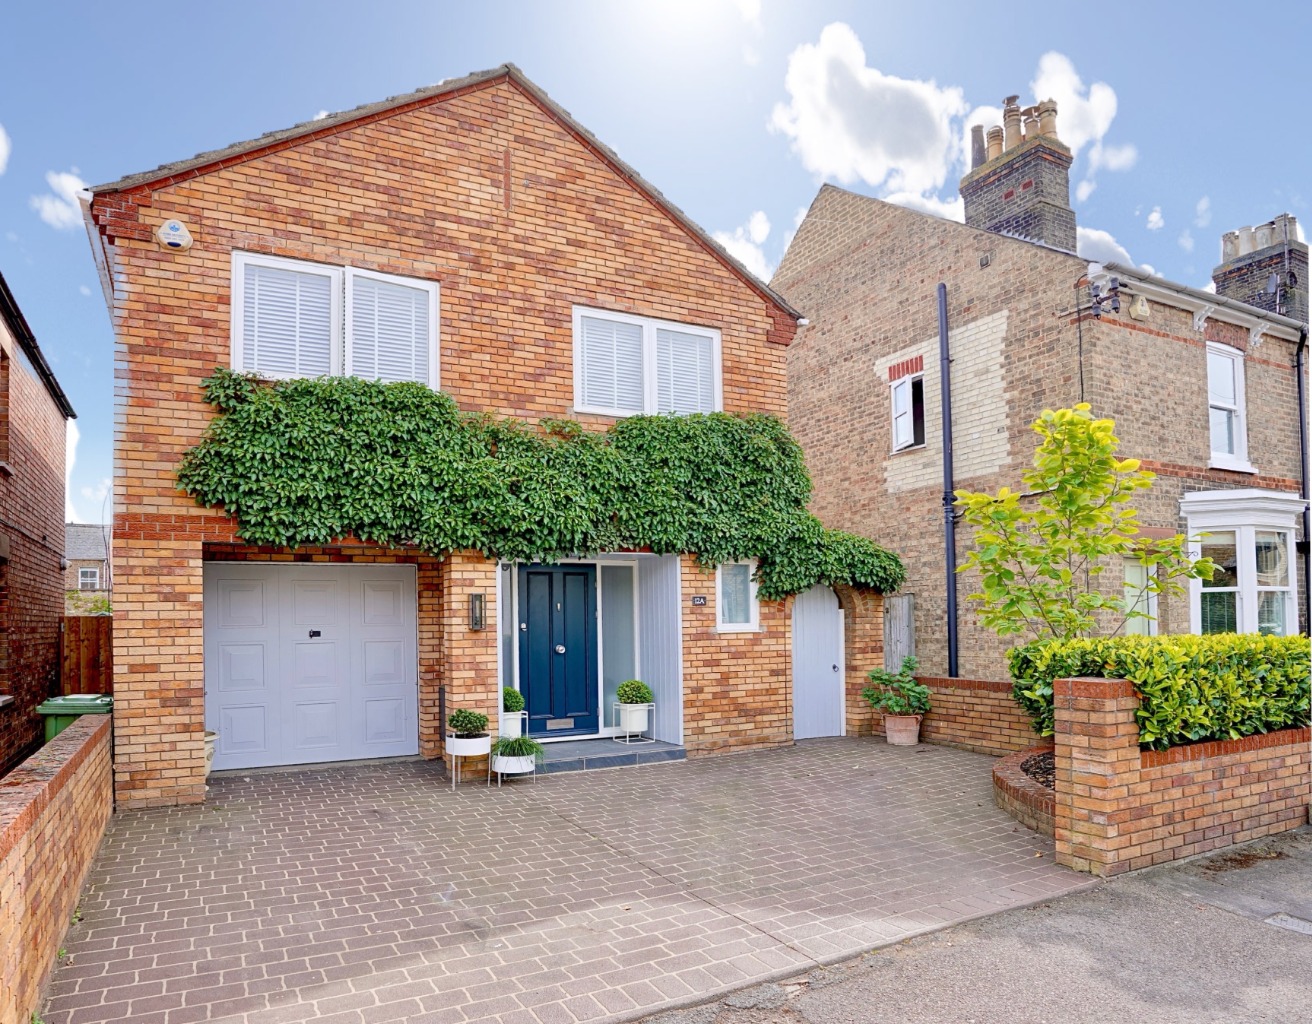 **OPEN HOUSE SATURDAY 28/5 2PM - 4PM CALL TO ARRANGE YOUR VIEWING TIME** STUNNING FOUR BEDROOM HOME** STONES THROW TO TOWN CENTRE** SPACIOUS KITCHEN/DINER WITH VAULTED CEILING AND EXPOSED OAK BEAMS** SOUTH FACING REAR GARDEN** SINGLE GARAGE AND DRIVEWAY**